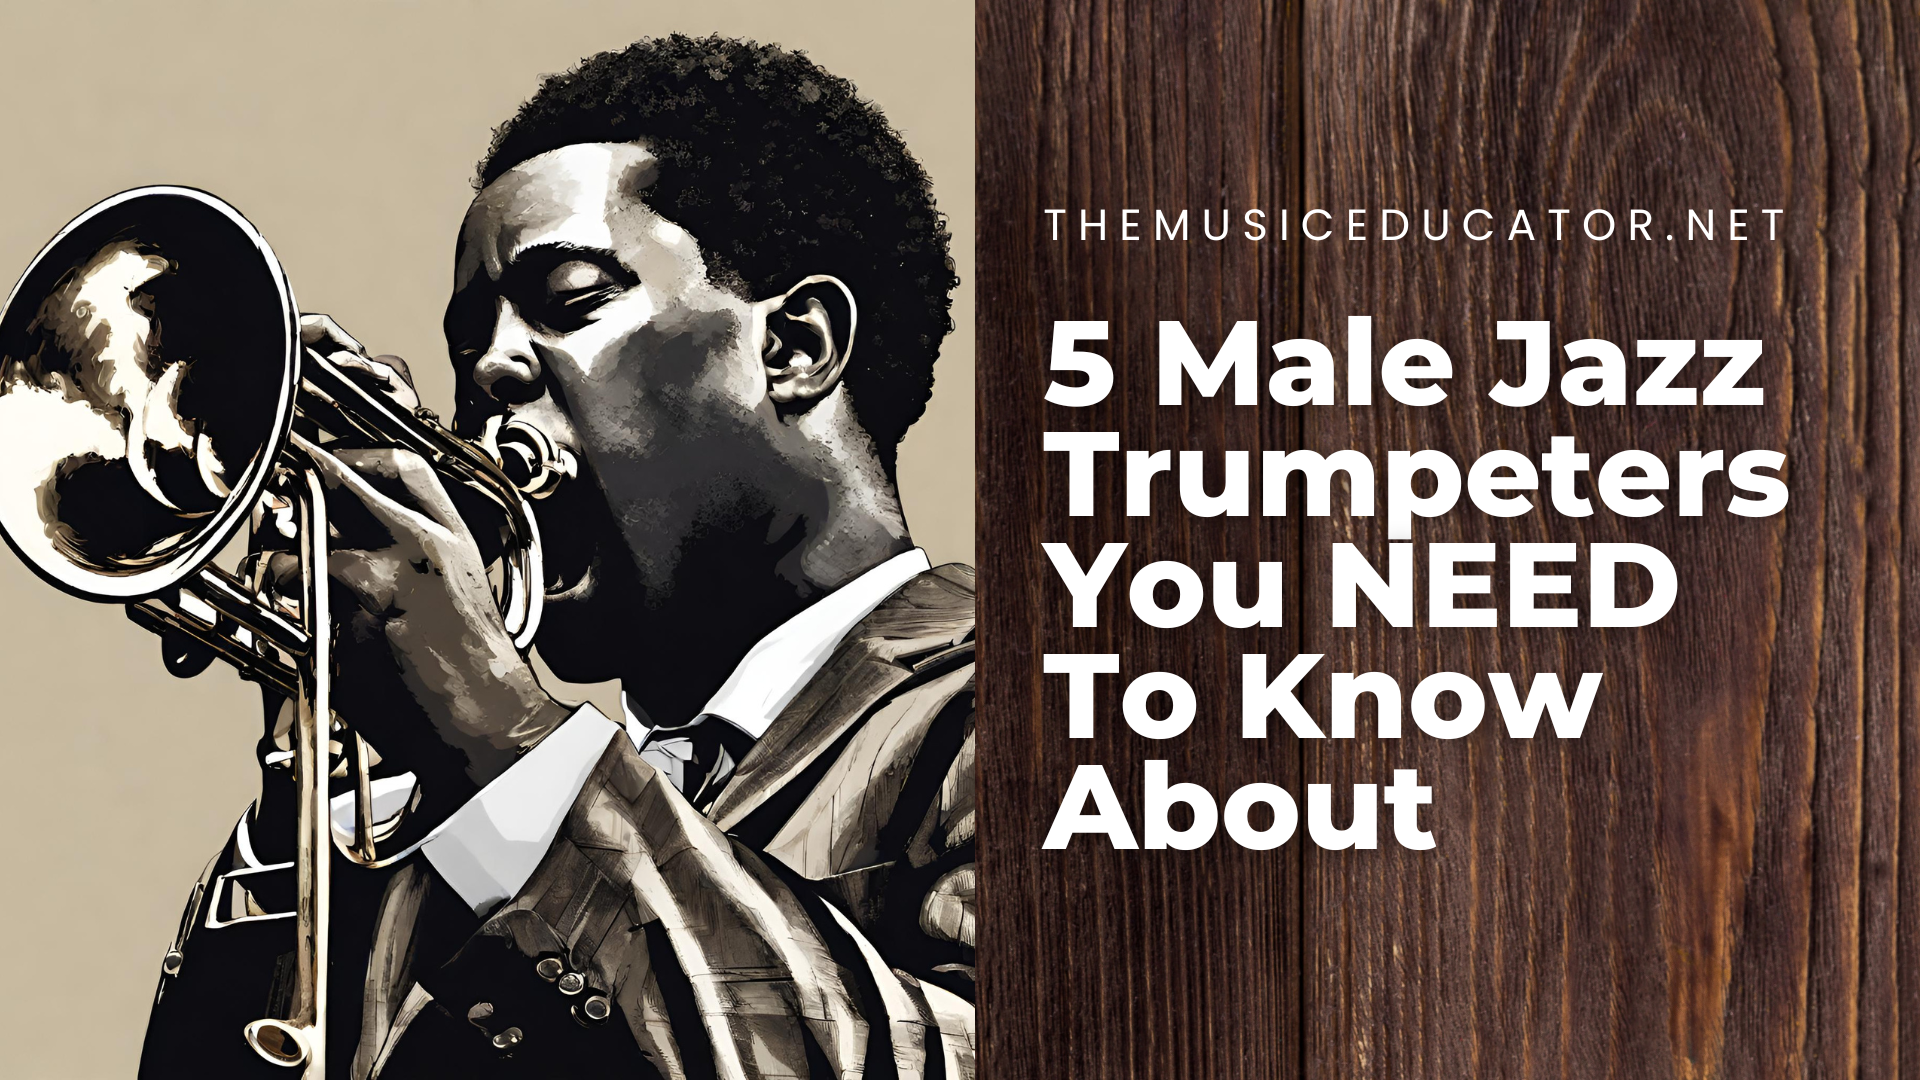 5 Male Jazz Trumpeters You Need To Know About